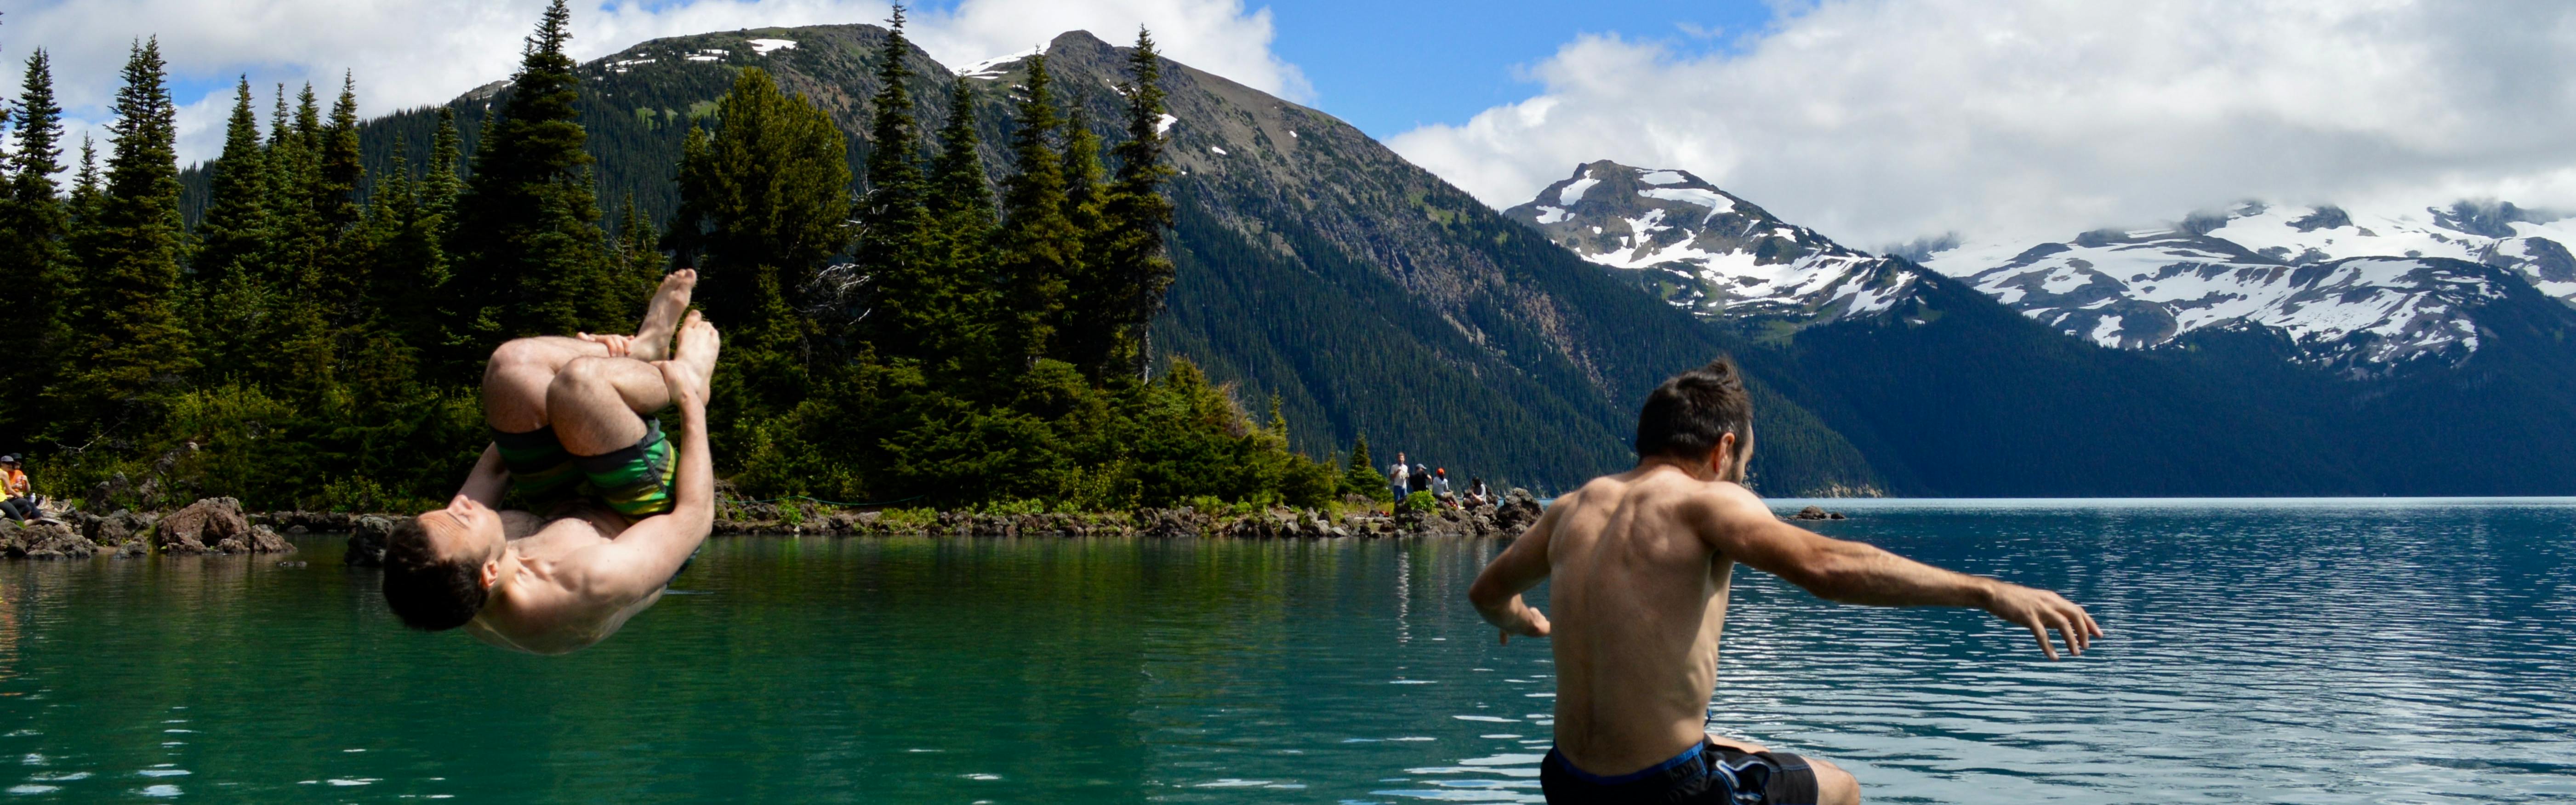 Two men jump into a lake. There are snow-topped mountains in the background. 